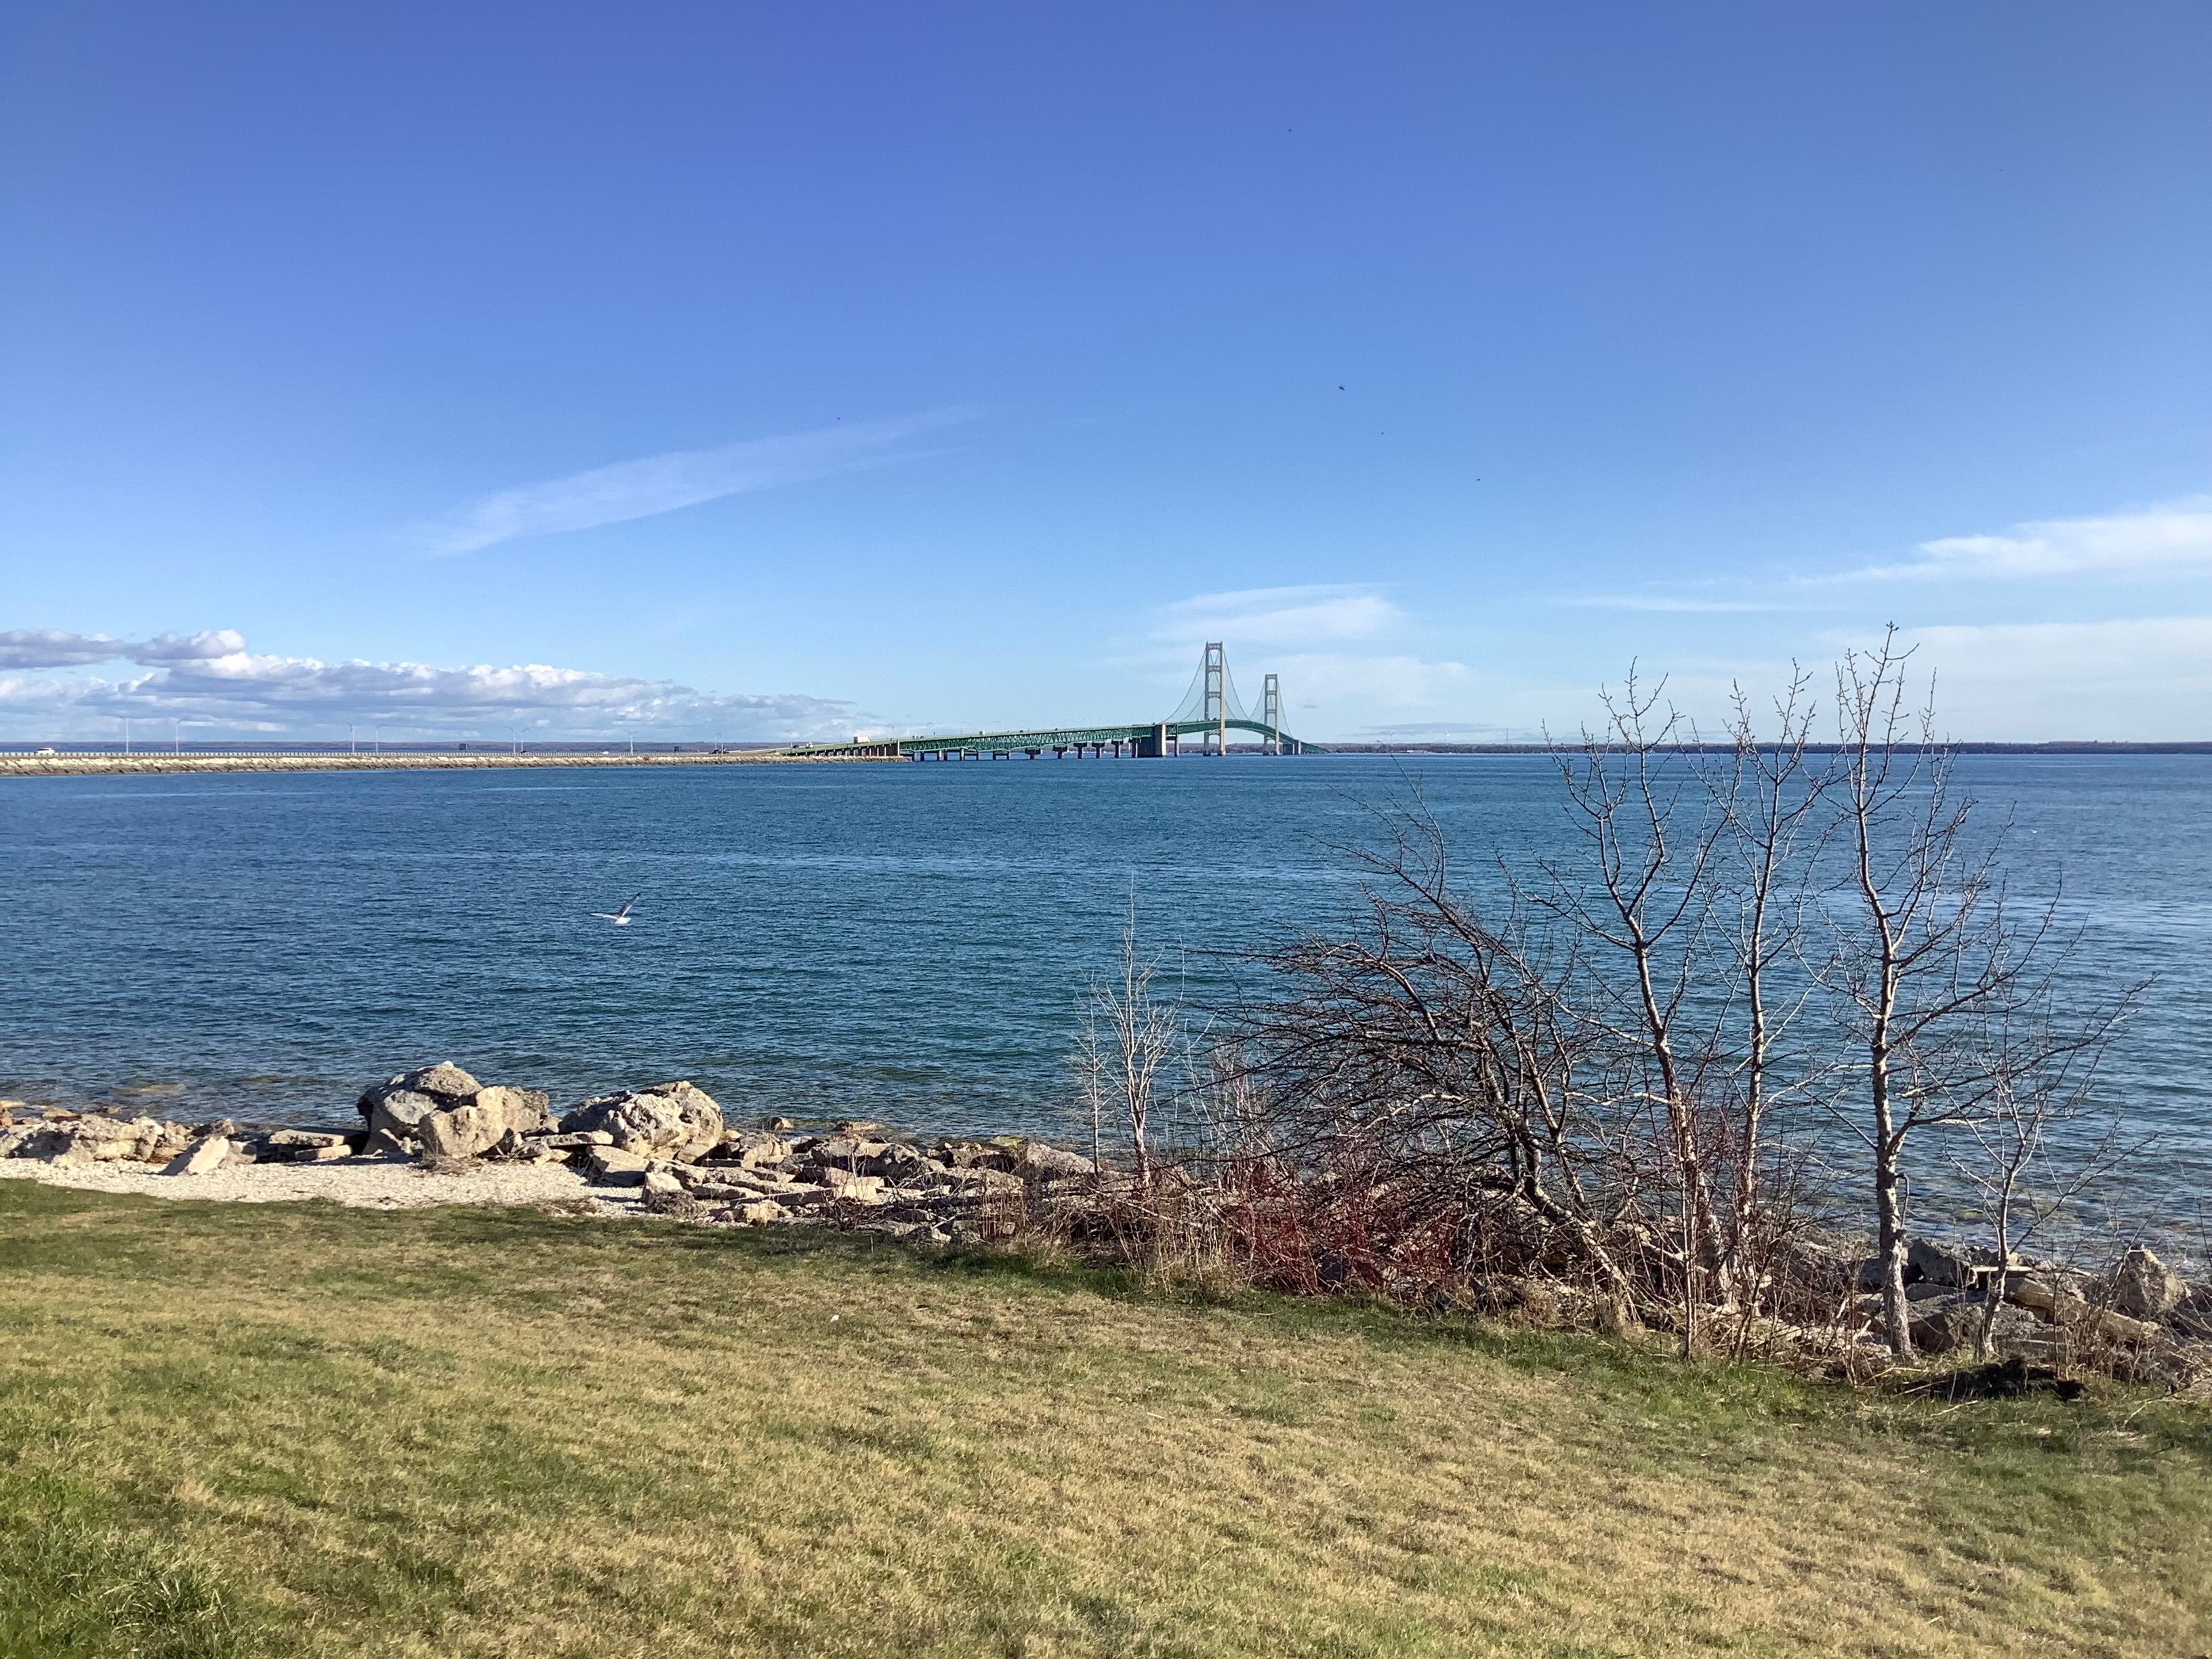 A view across the Straits of Mackinac, with the Mackinac Bridge far in the distance against a blue sky